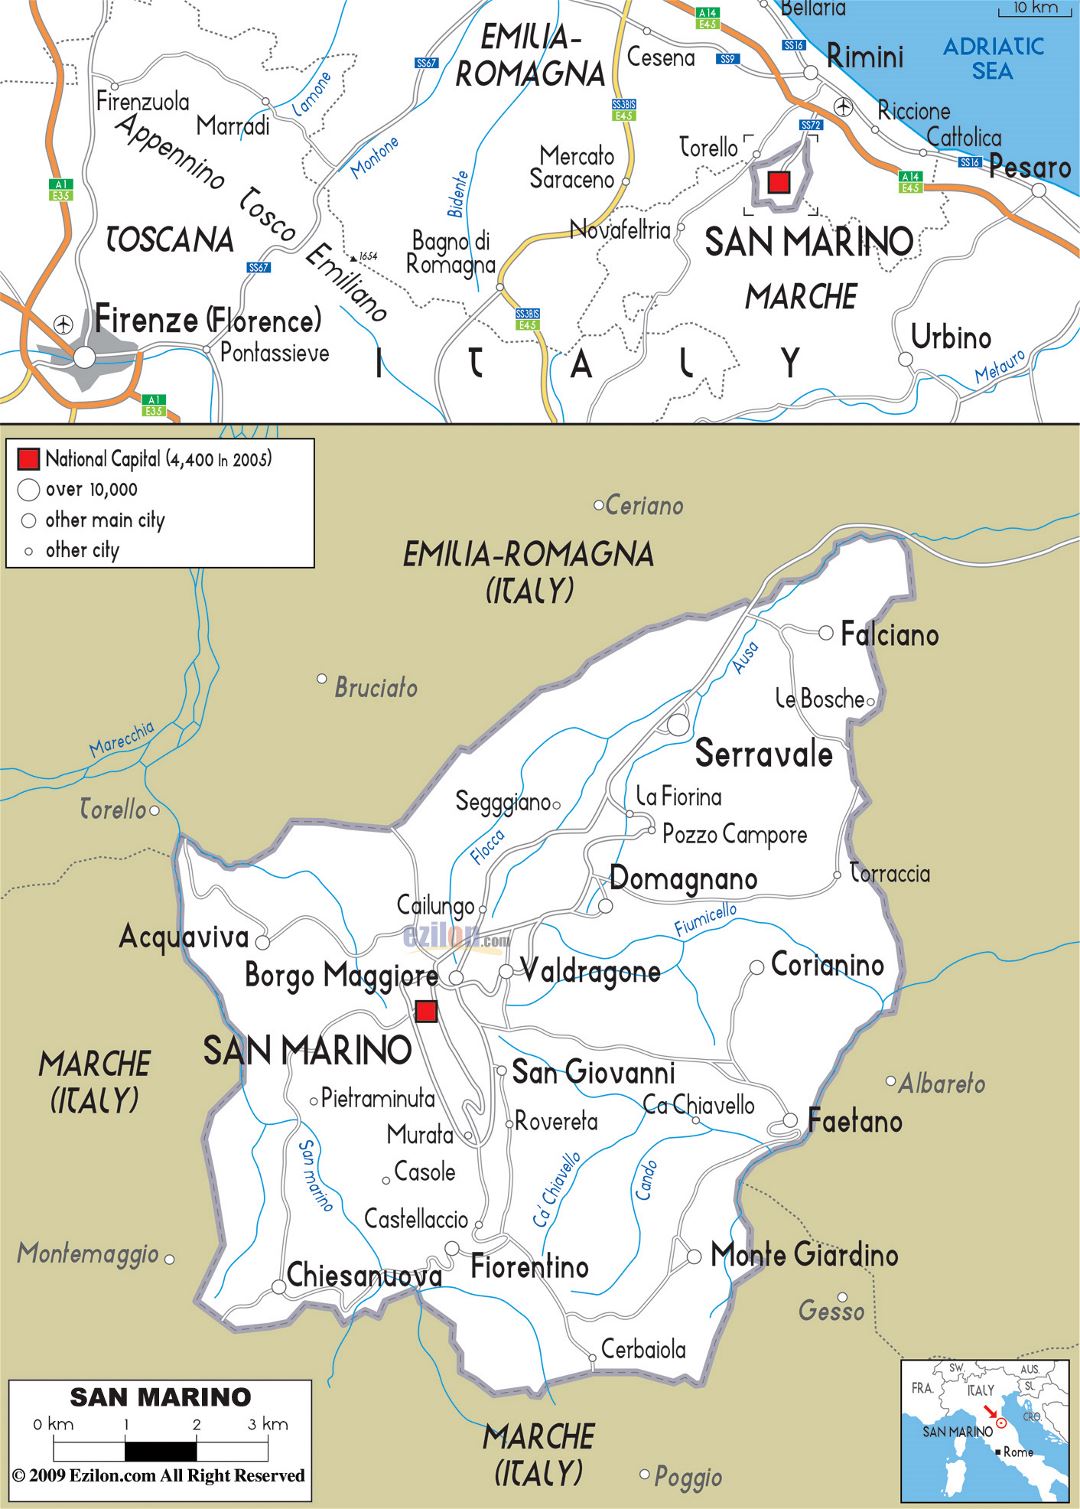 Large road map of San Marino with cities